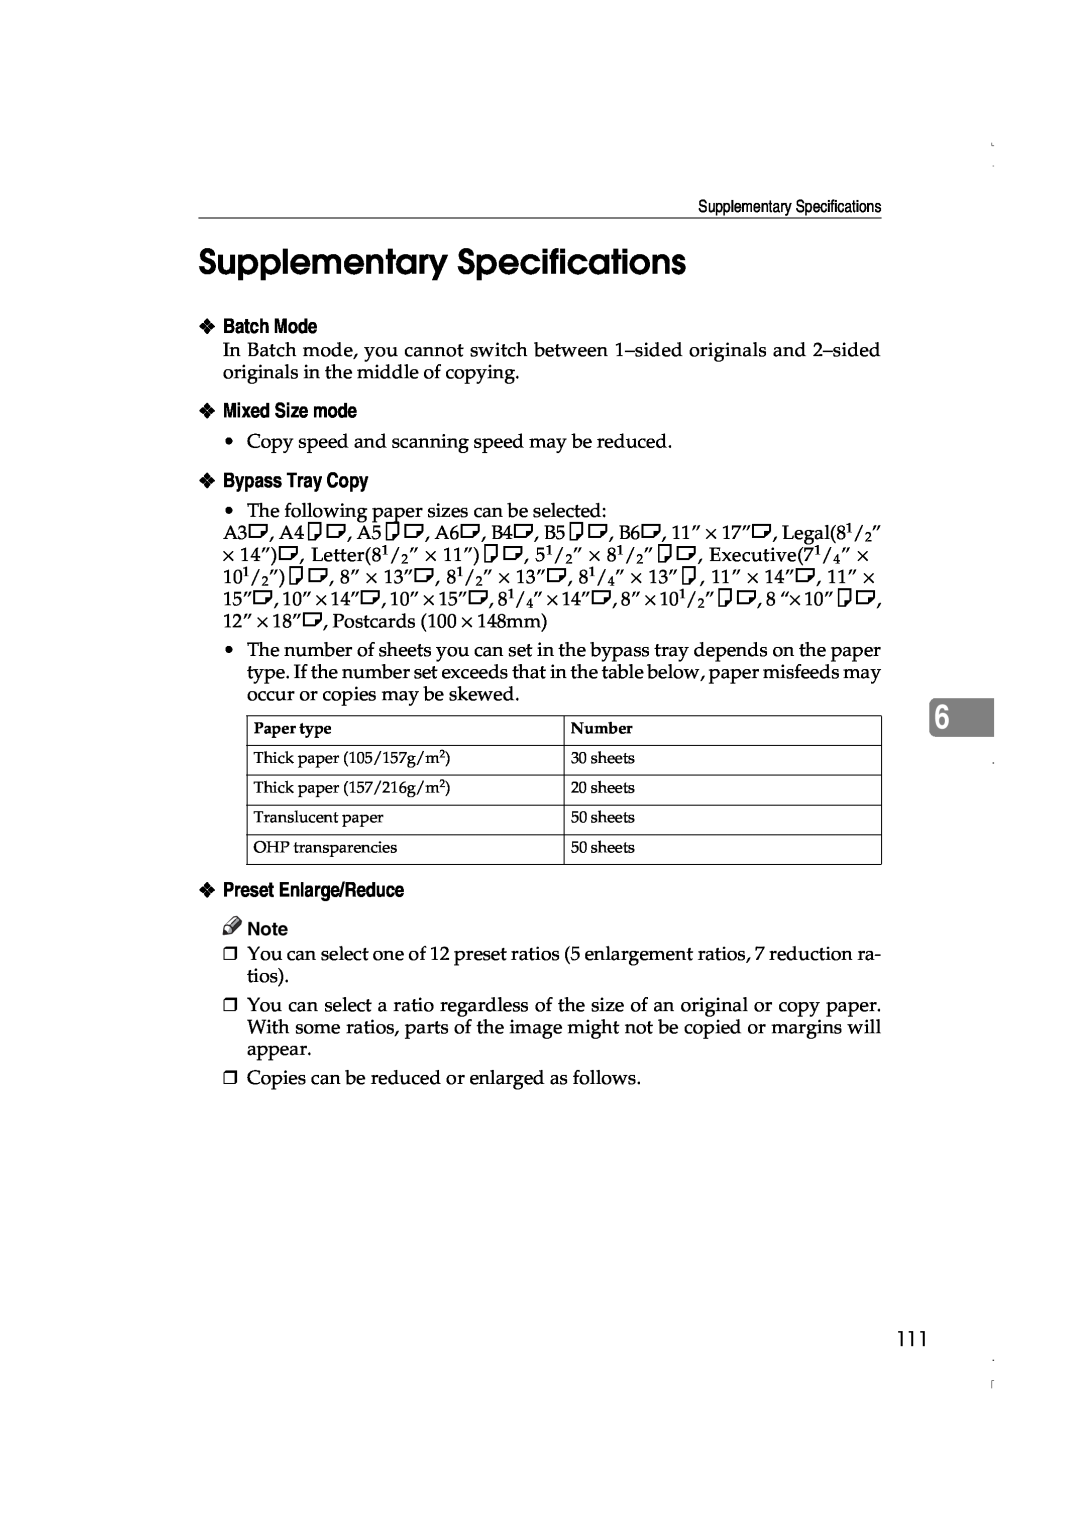 Lanier LD060, LD075 Supplementary Specifications, Batch Mode, Bypass Tray Copy, Preset Enlarge/Reduce, Mixed Size mode 